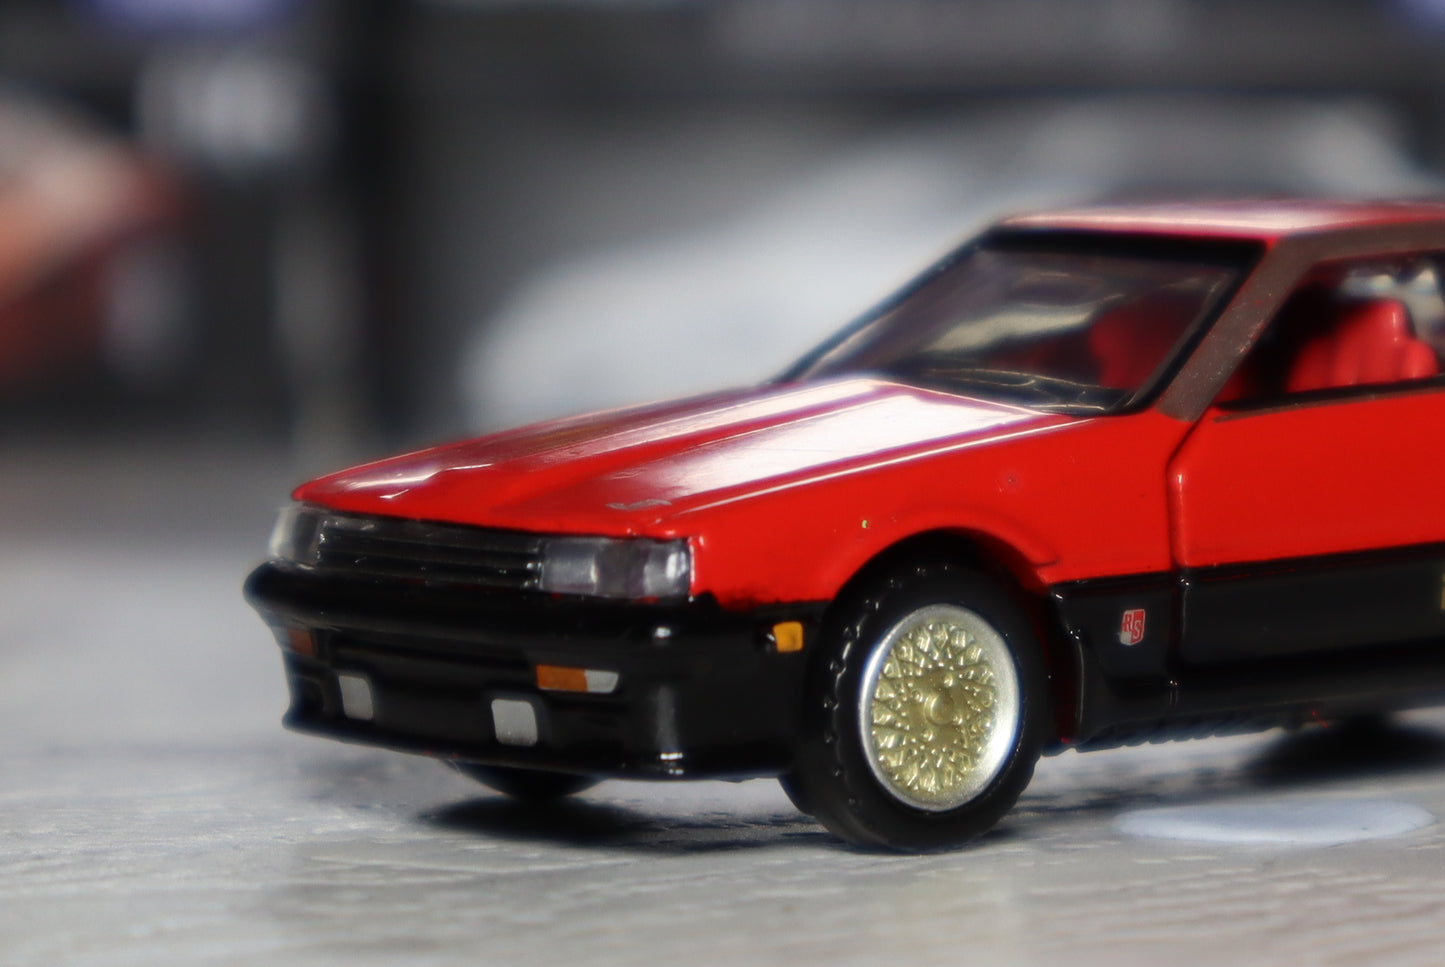 TOMICA Premium 1:64 Scale No.20 Nissan Skyline HT 2000 Turbo RS Red